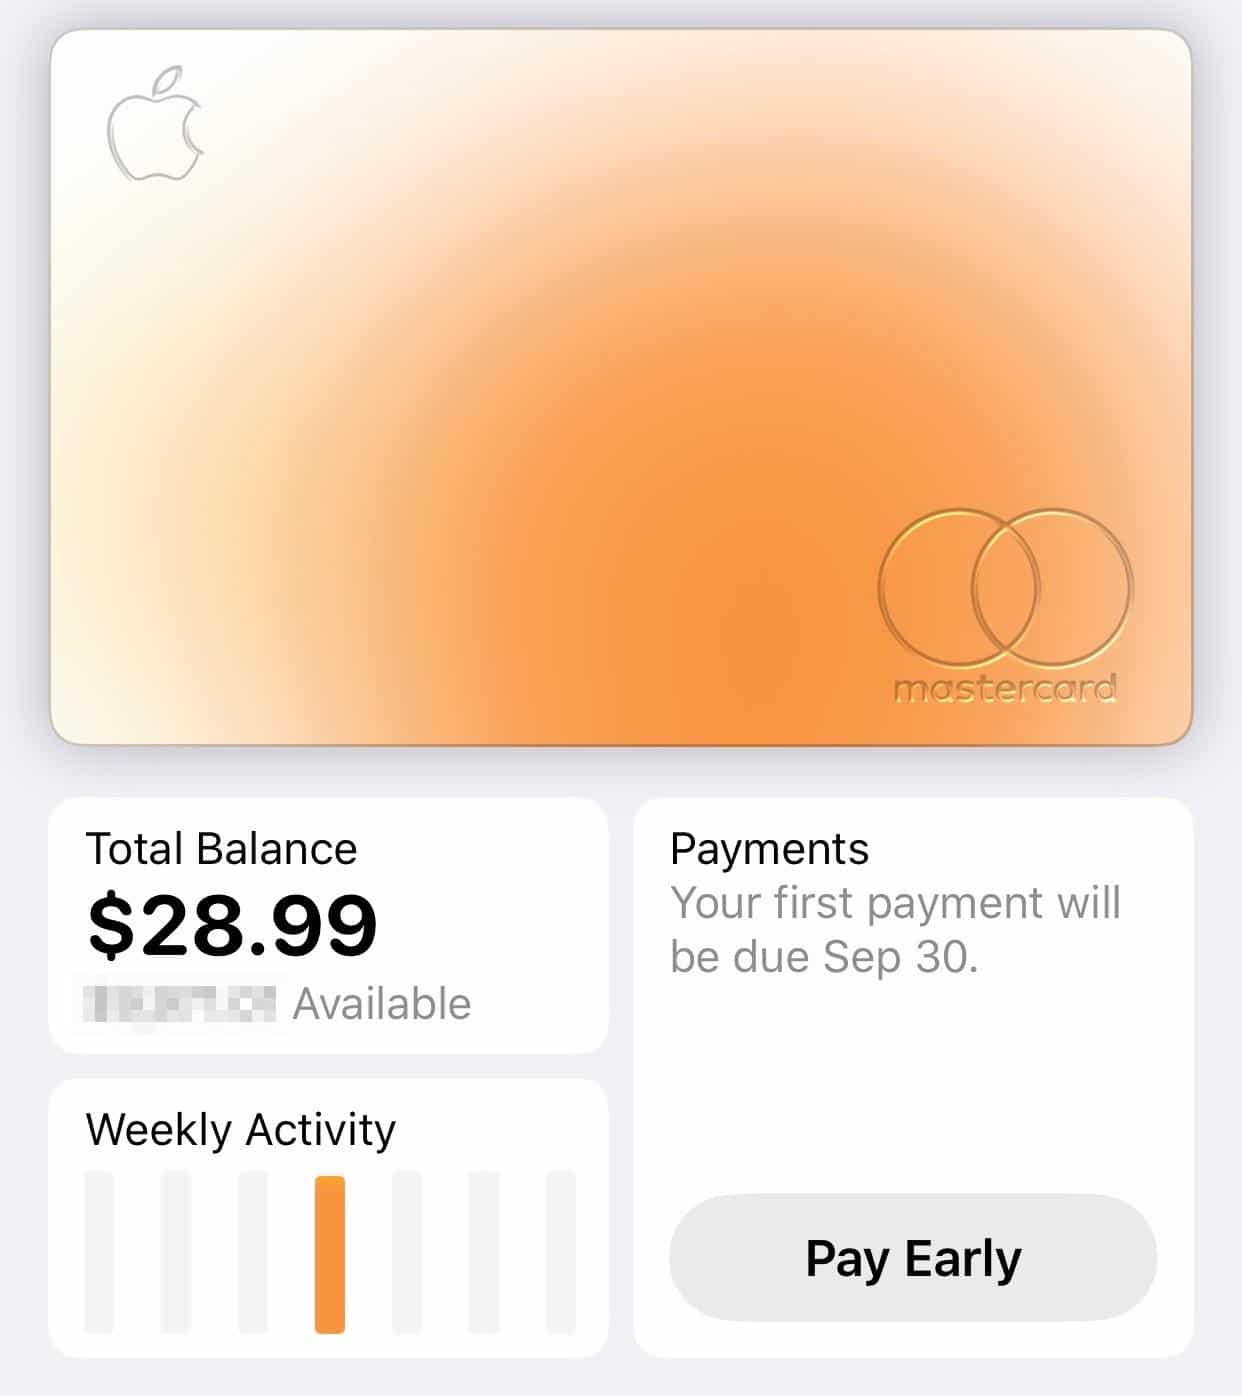 Review: The Apple Card can simplify your credit, but it